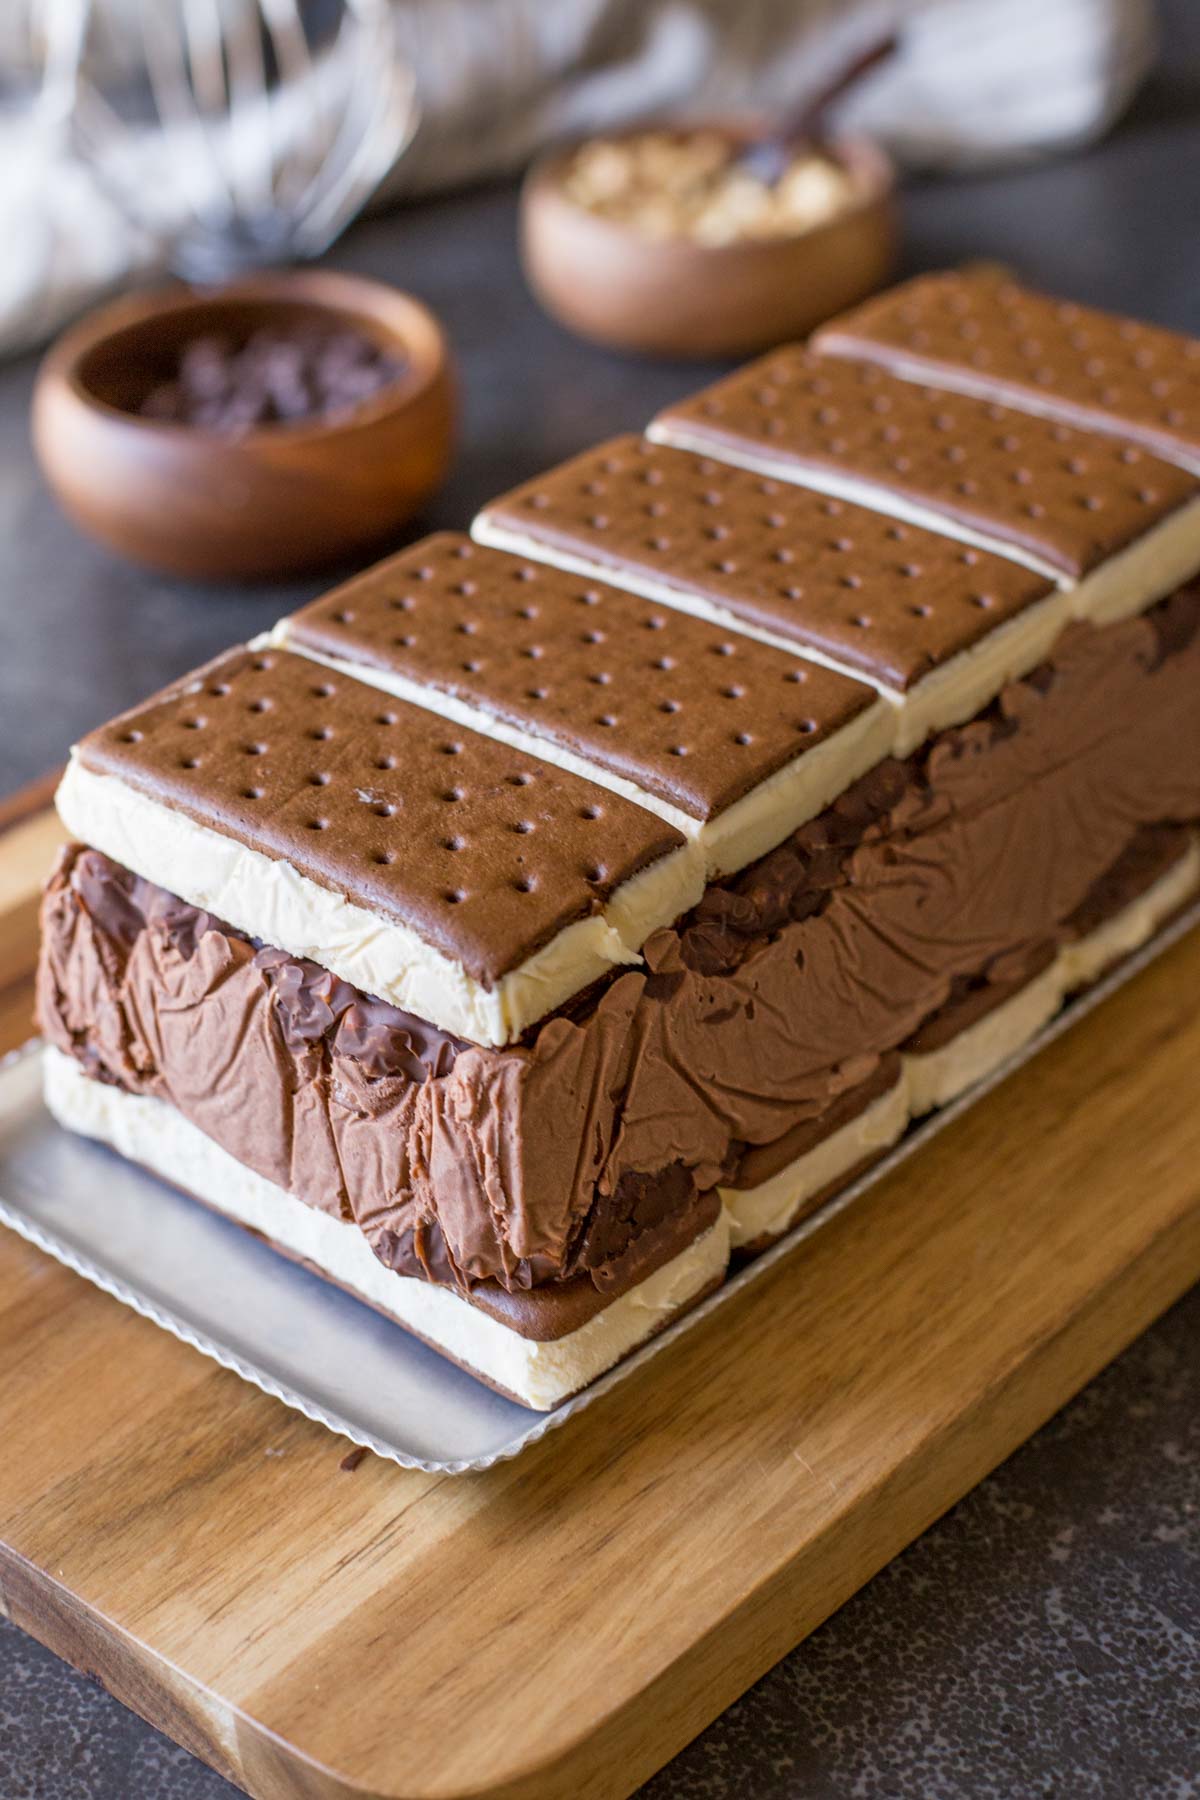 Chocolate Peanut Butter Ice Cream Slice Cake before the whipped cream layer is put on.  